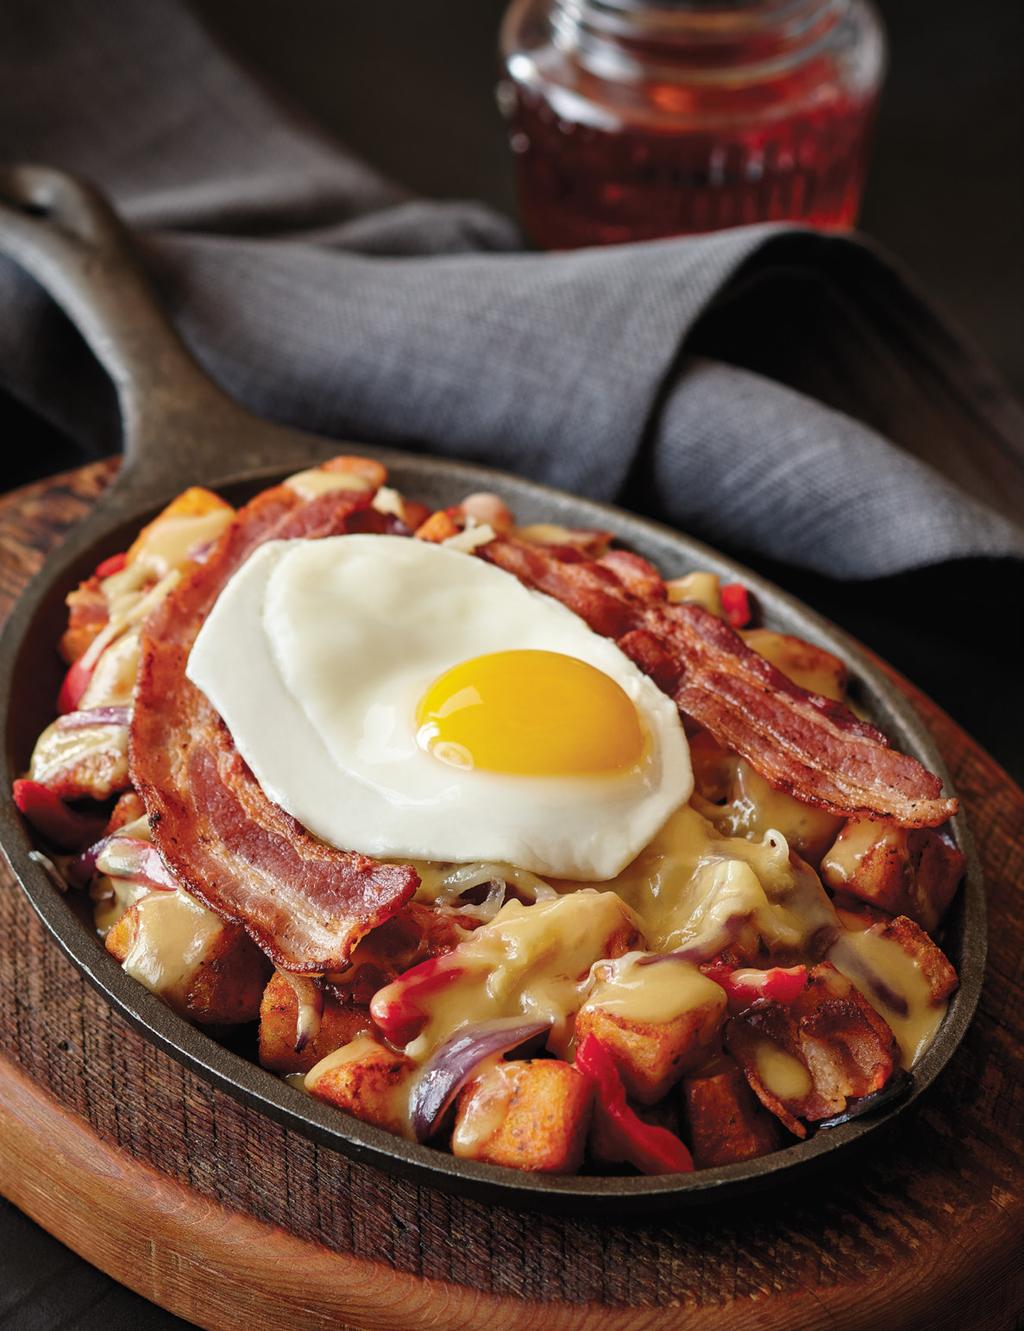 TOP PICK EPURE MAPL SYRUP MAPLE SYRUP SKILLET Egg, bacon, roasted red peppers, red onions and mozzarella.